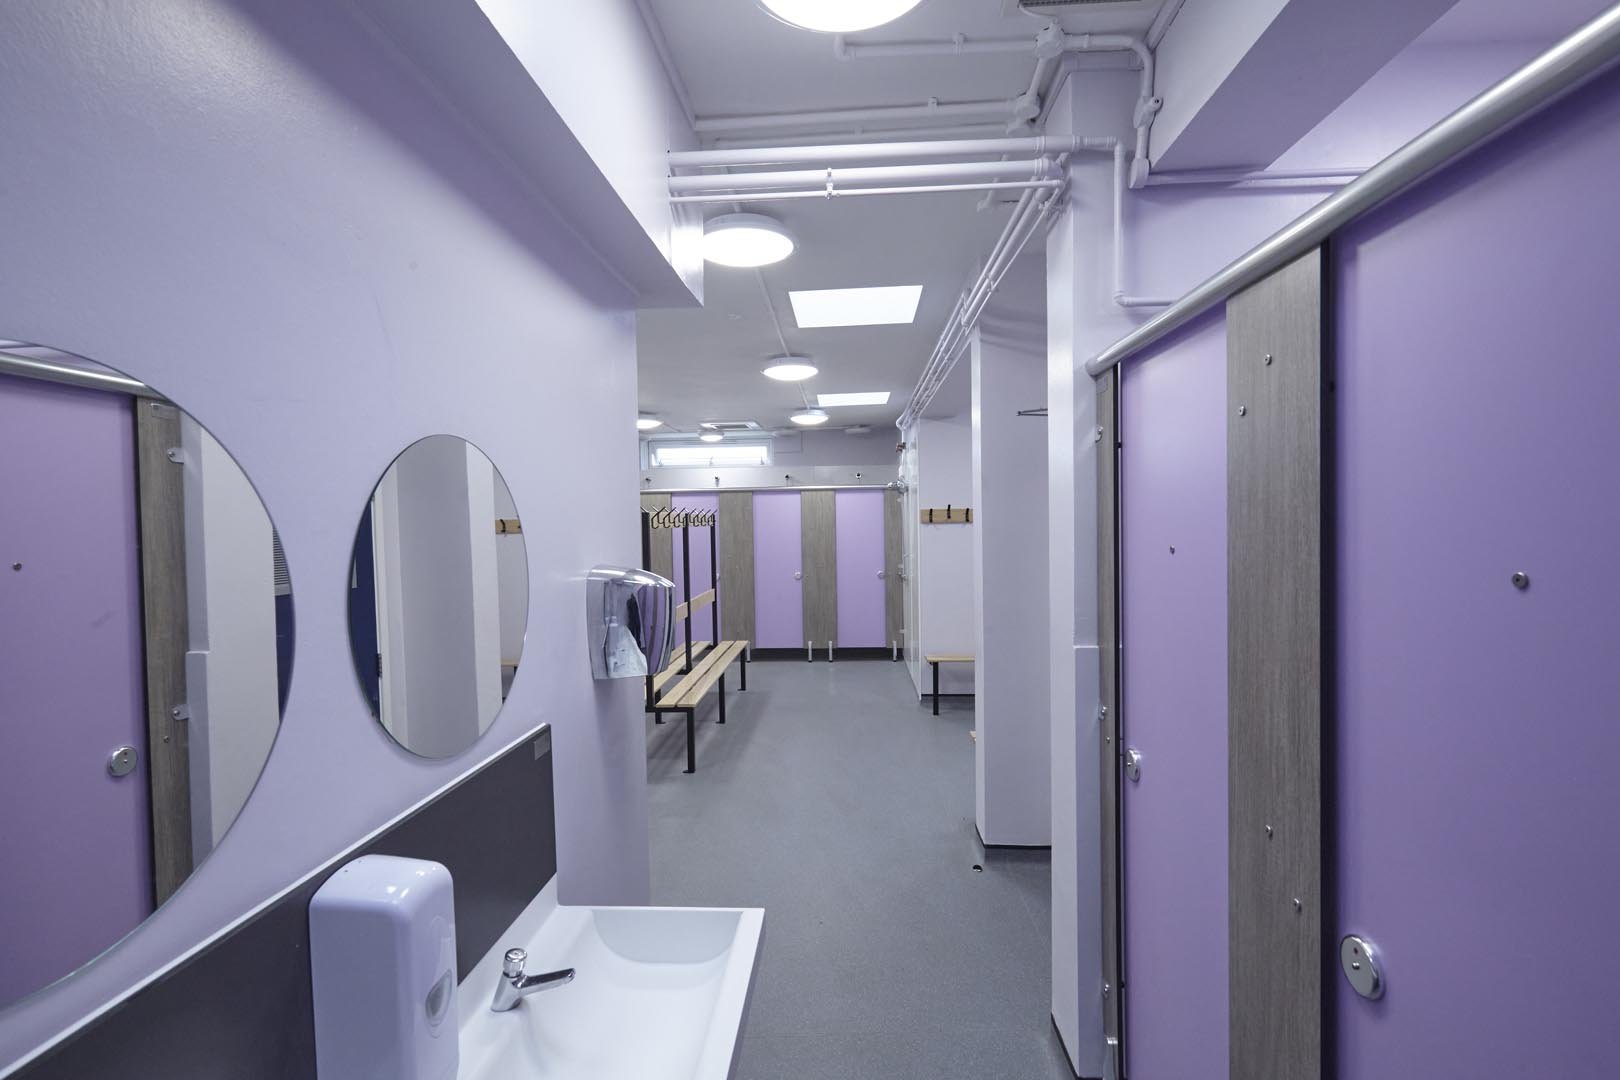 purple toilets, vanity trough and changing rooms at churchmead school.jpg